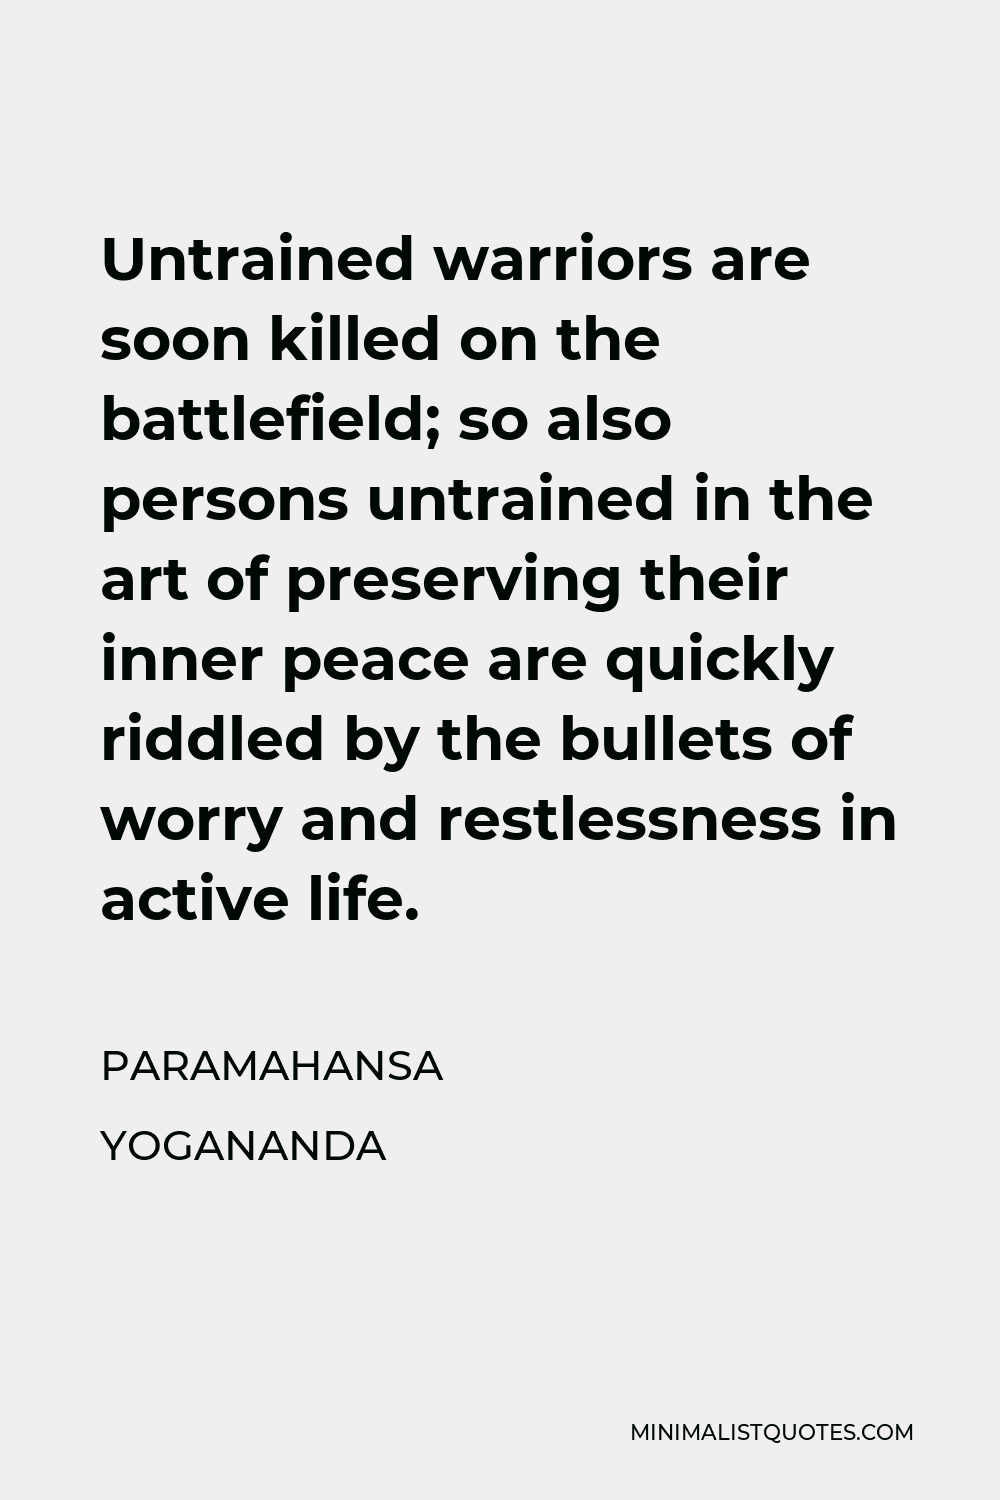 Paramahansa Yogananda Quote - Untrained warriors are soon killed on the battlefield; so also persons untrained in the art of preserving their inner peace are quickly riddled by the bullets of worry and restlessness in active life.